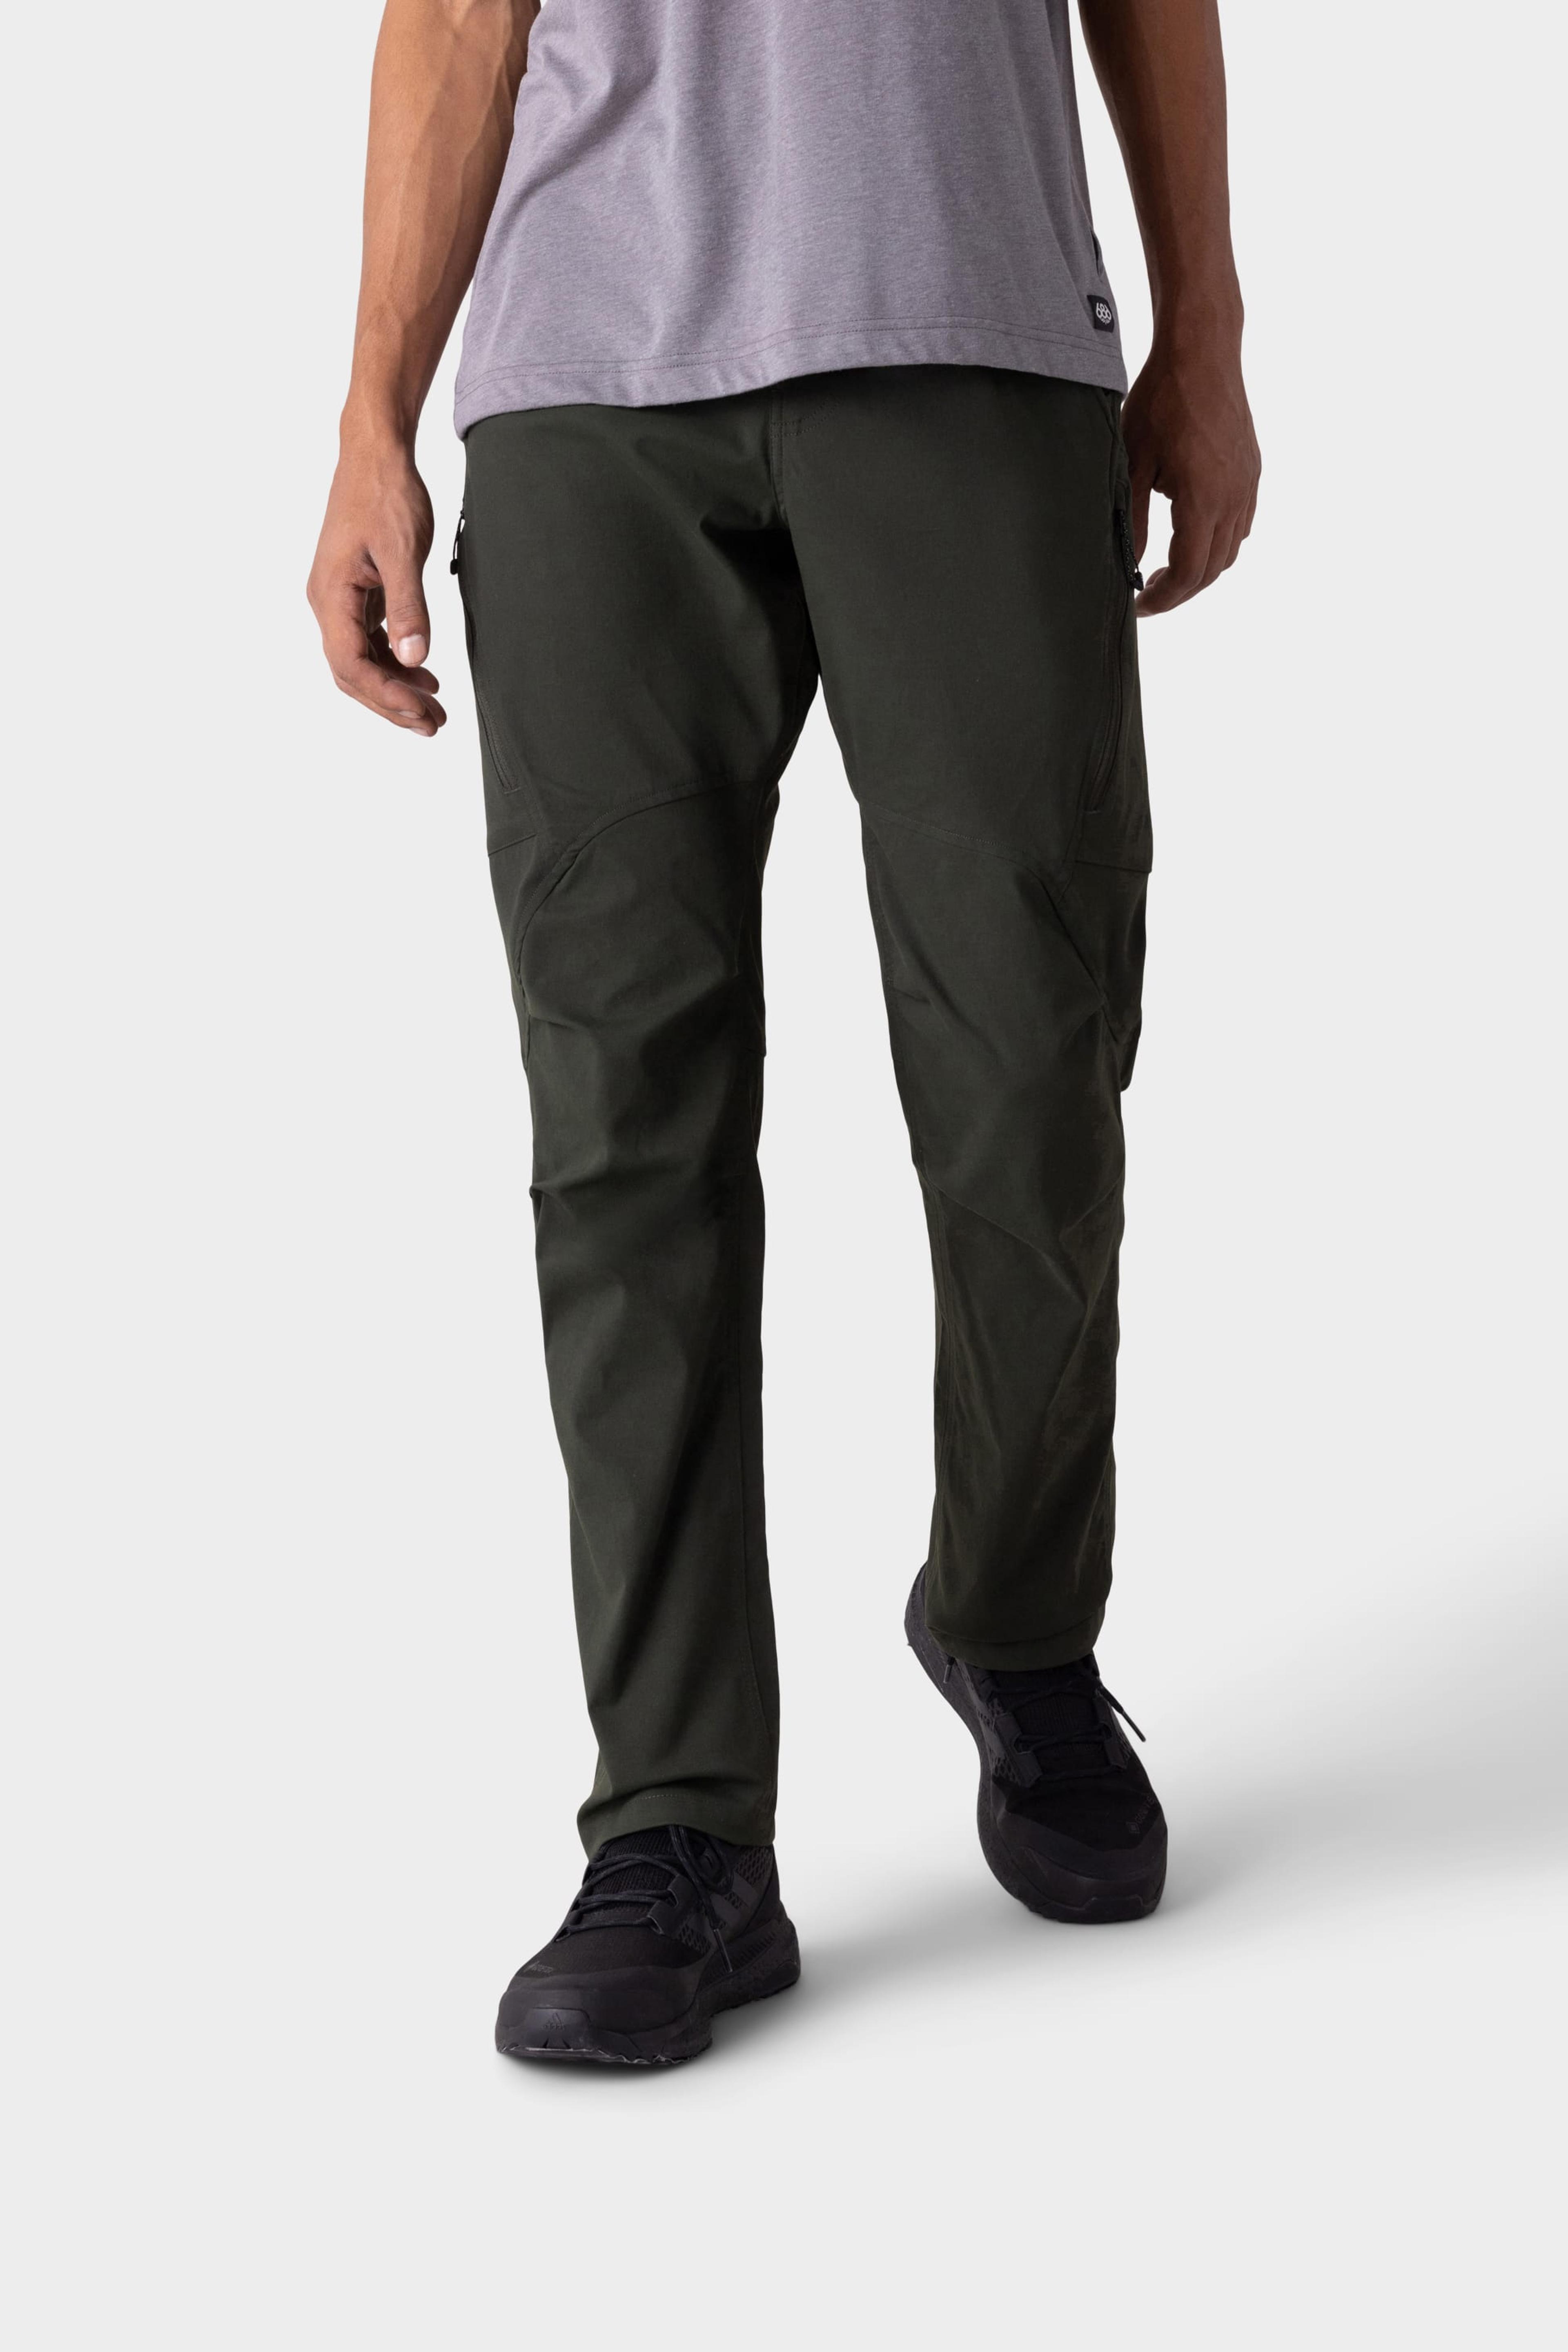 Alternate View 54 of 686 Men's Anything Cargo Pant - Relaxed Fit